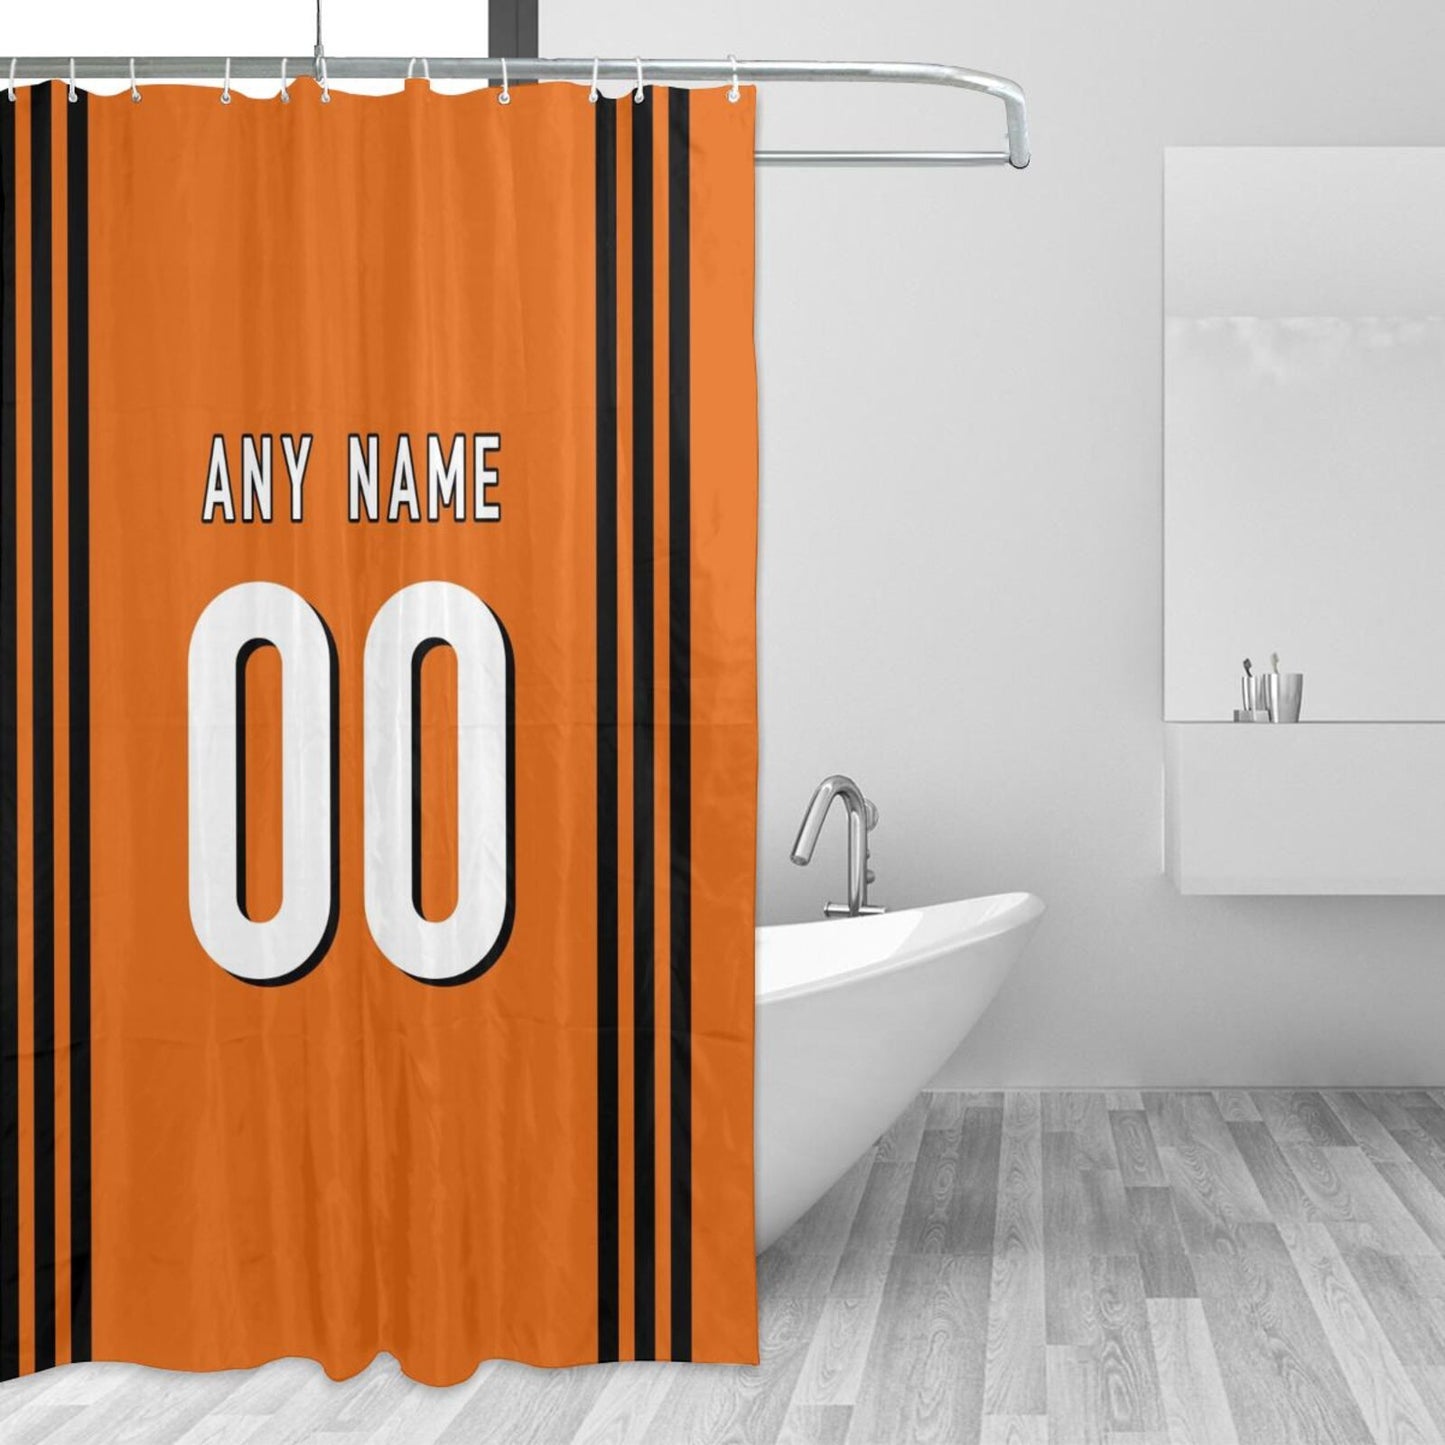 Custom Football Cincinnati Bengals style personalized shower curtain custom design name and number set of 12 shower curtain hooks Rings